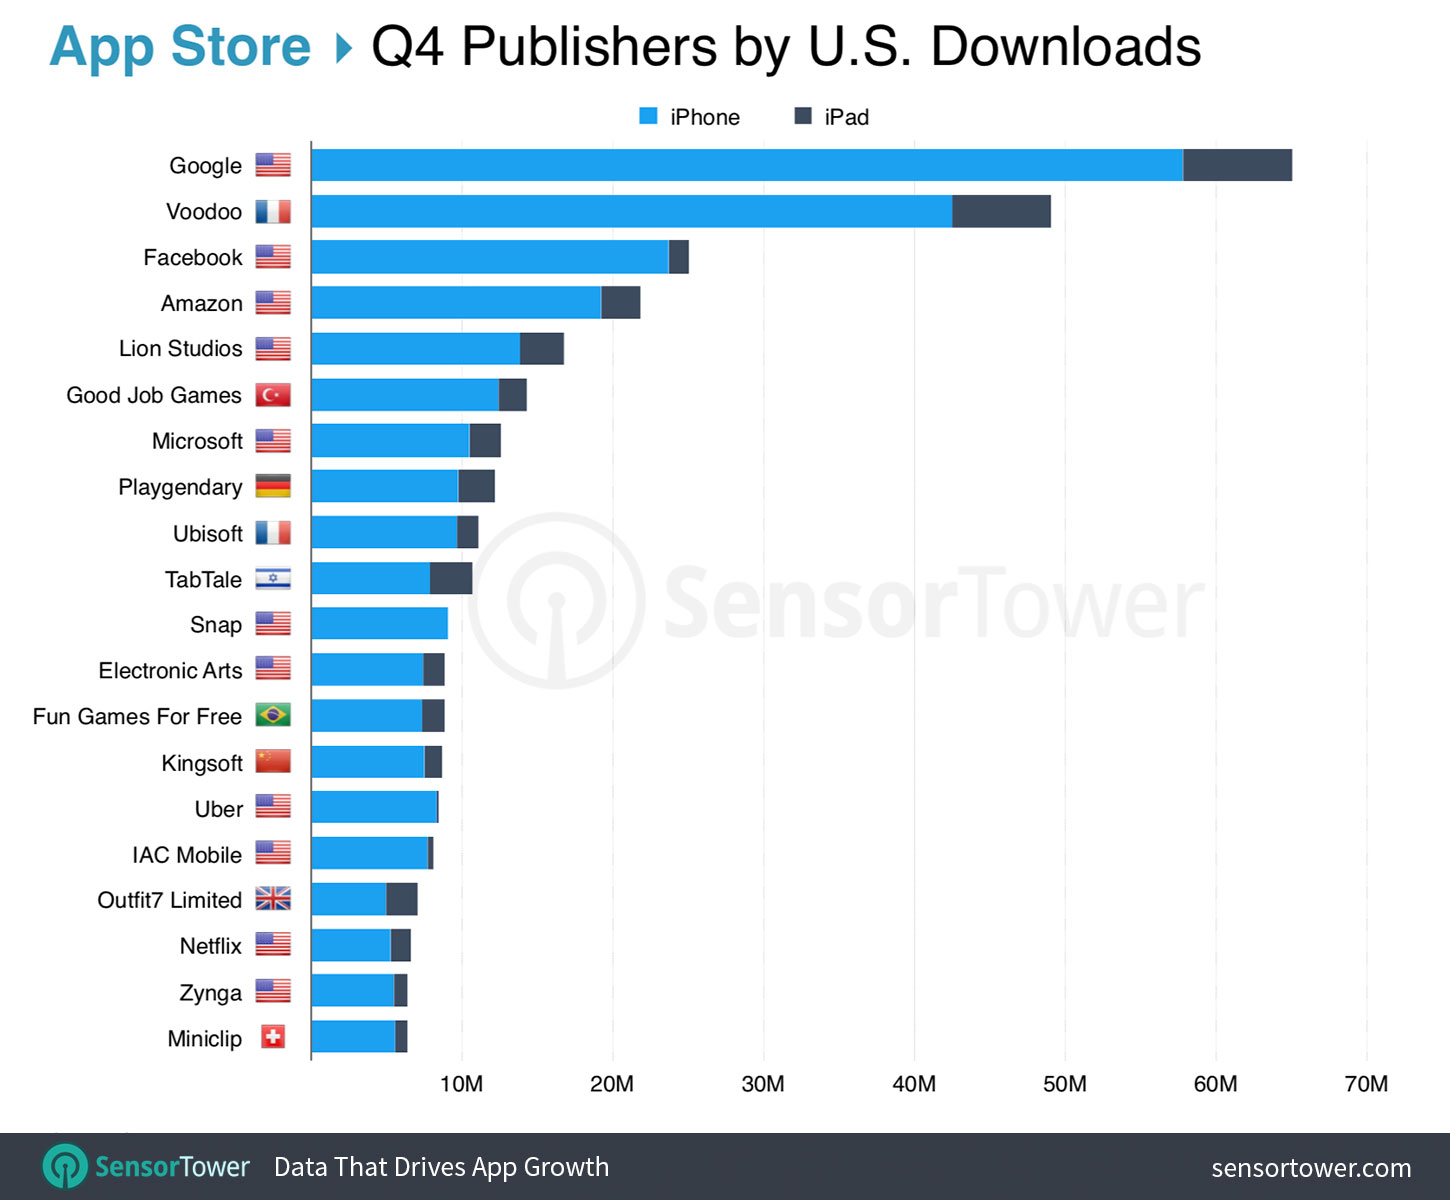 Top App Store Publishers in the U.S. for Q4 2018